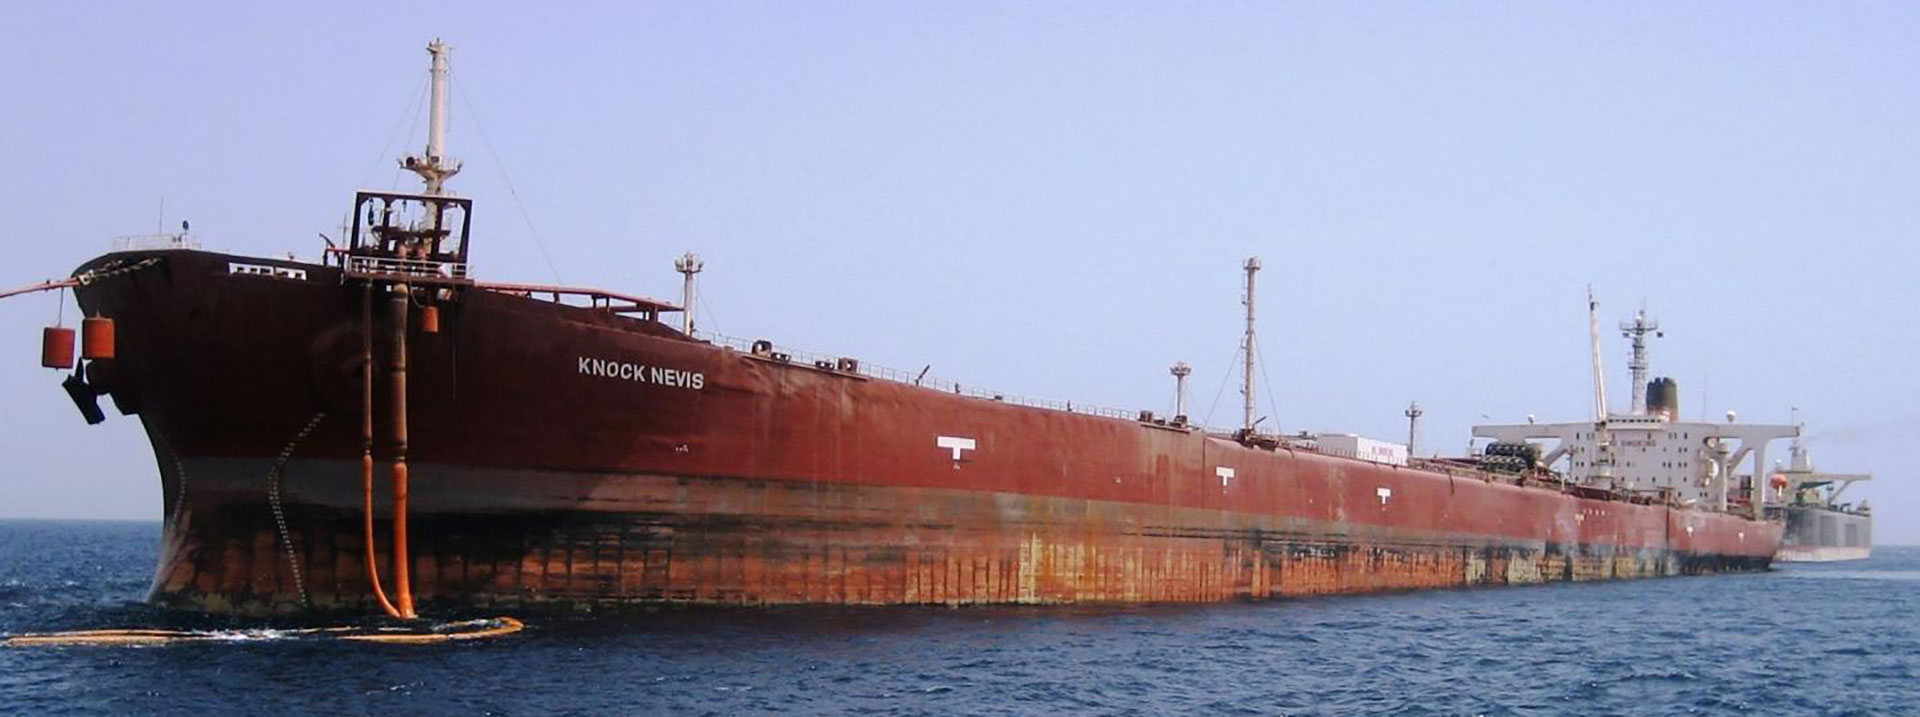 The Knock Nevis: Biggest Super Tanker in the World! ®